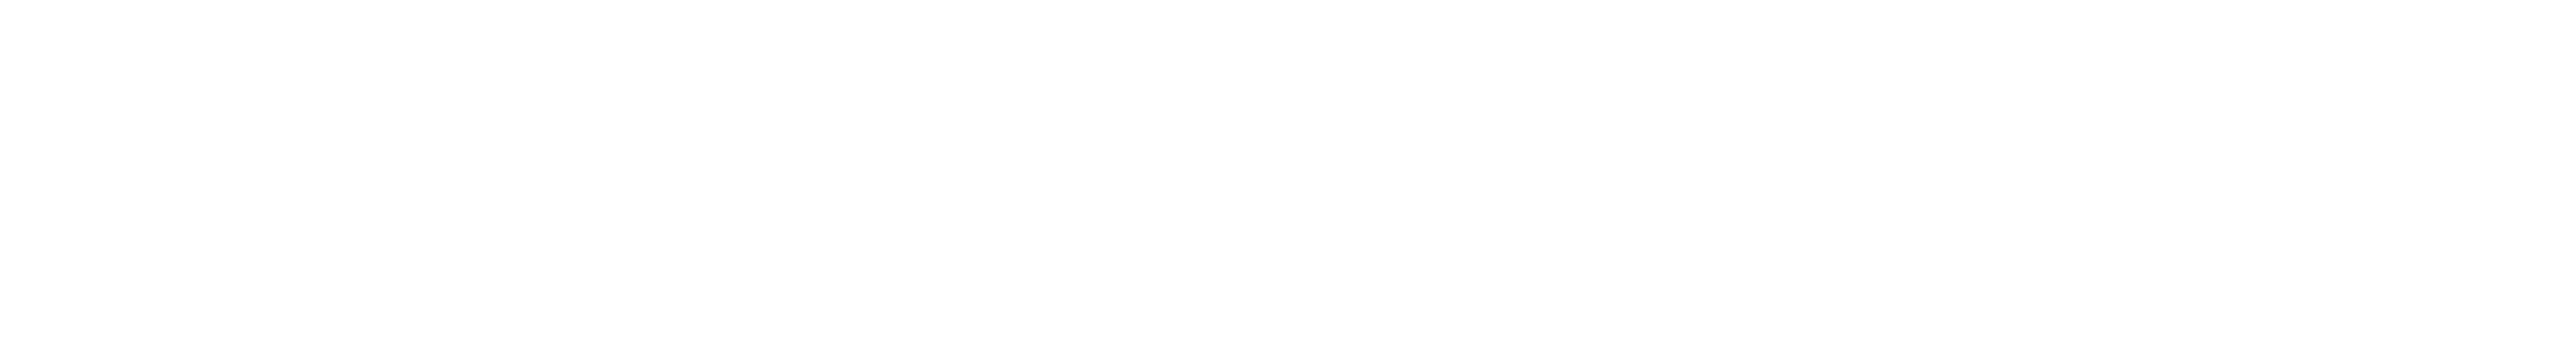 Flak Sack funded by Kickstarter and Indiegogo 